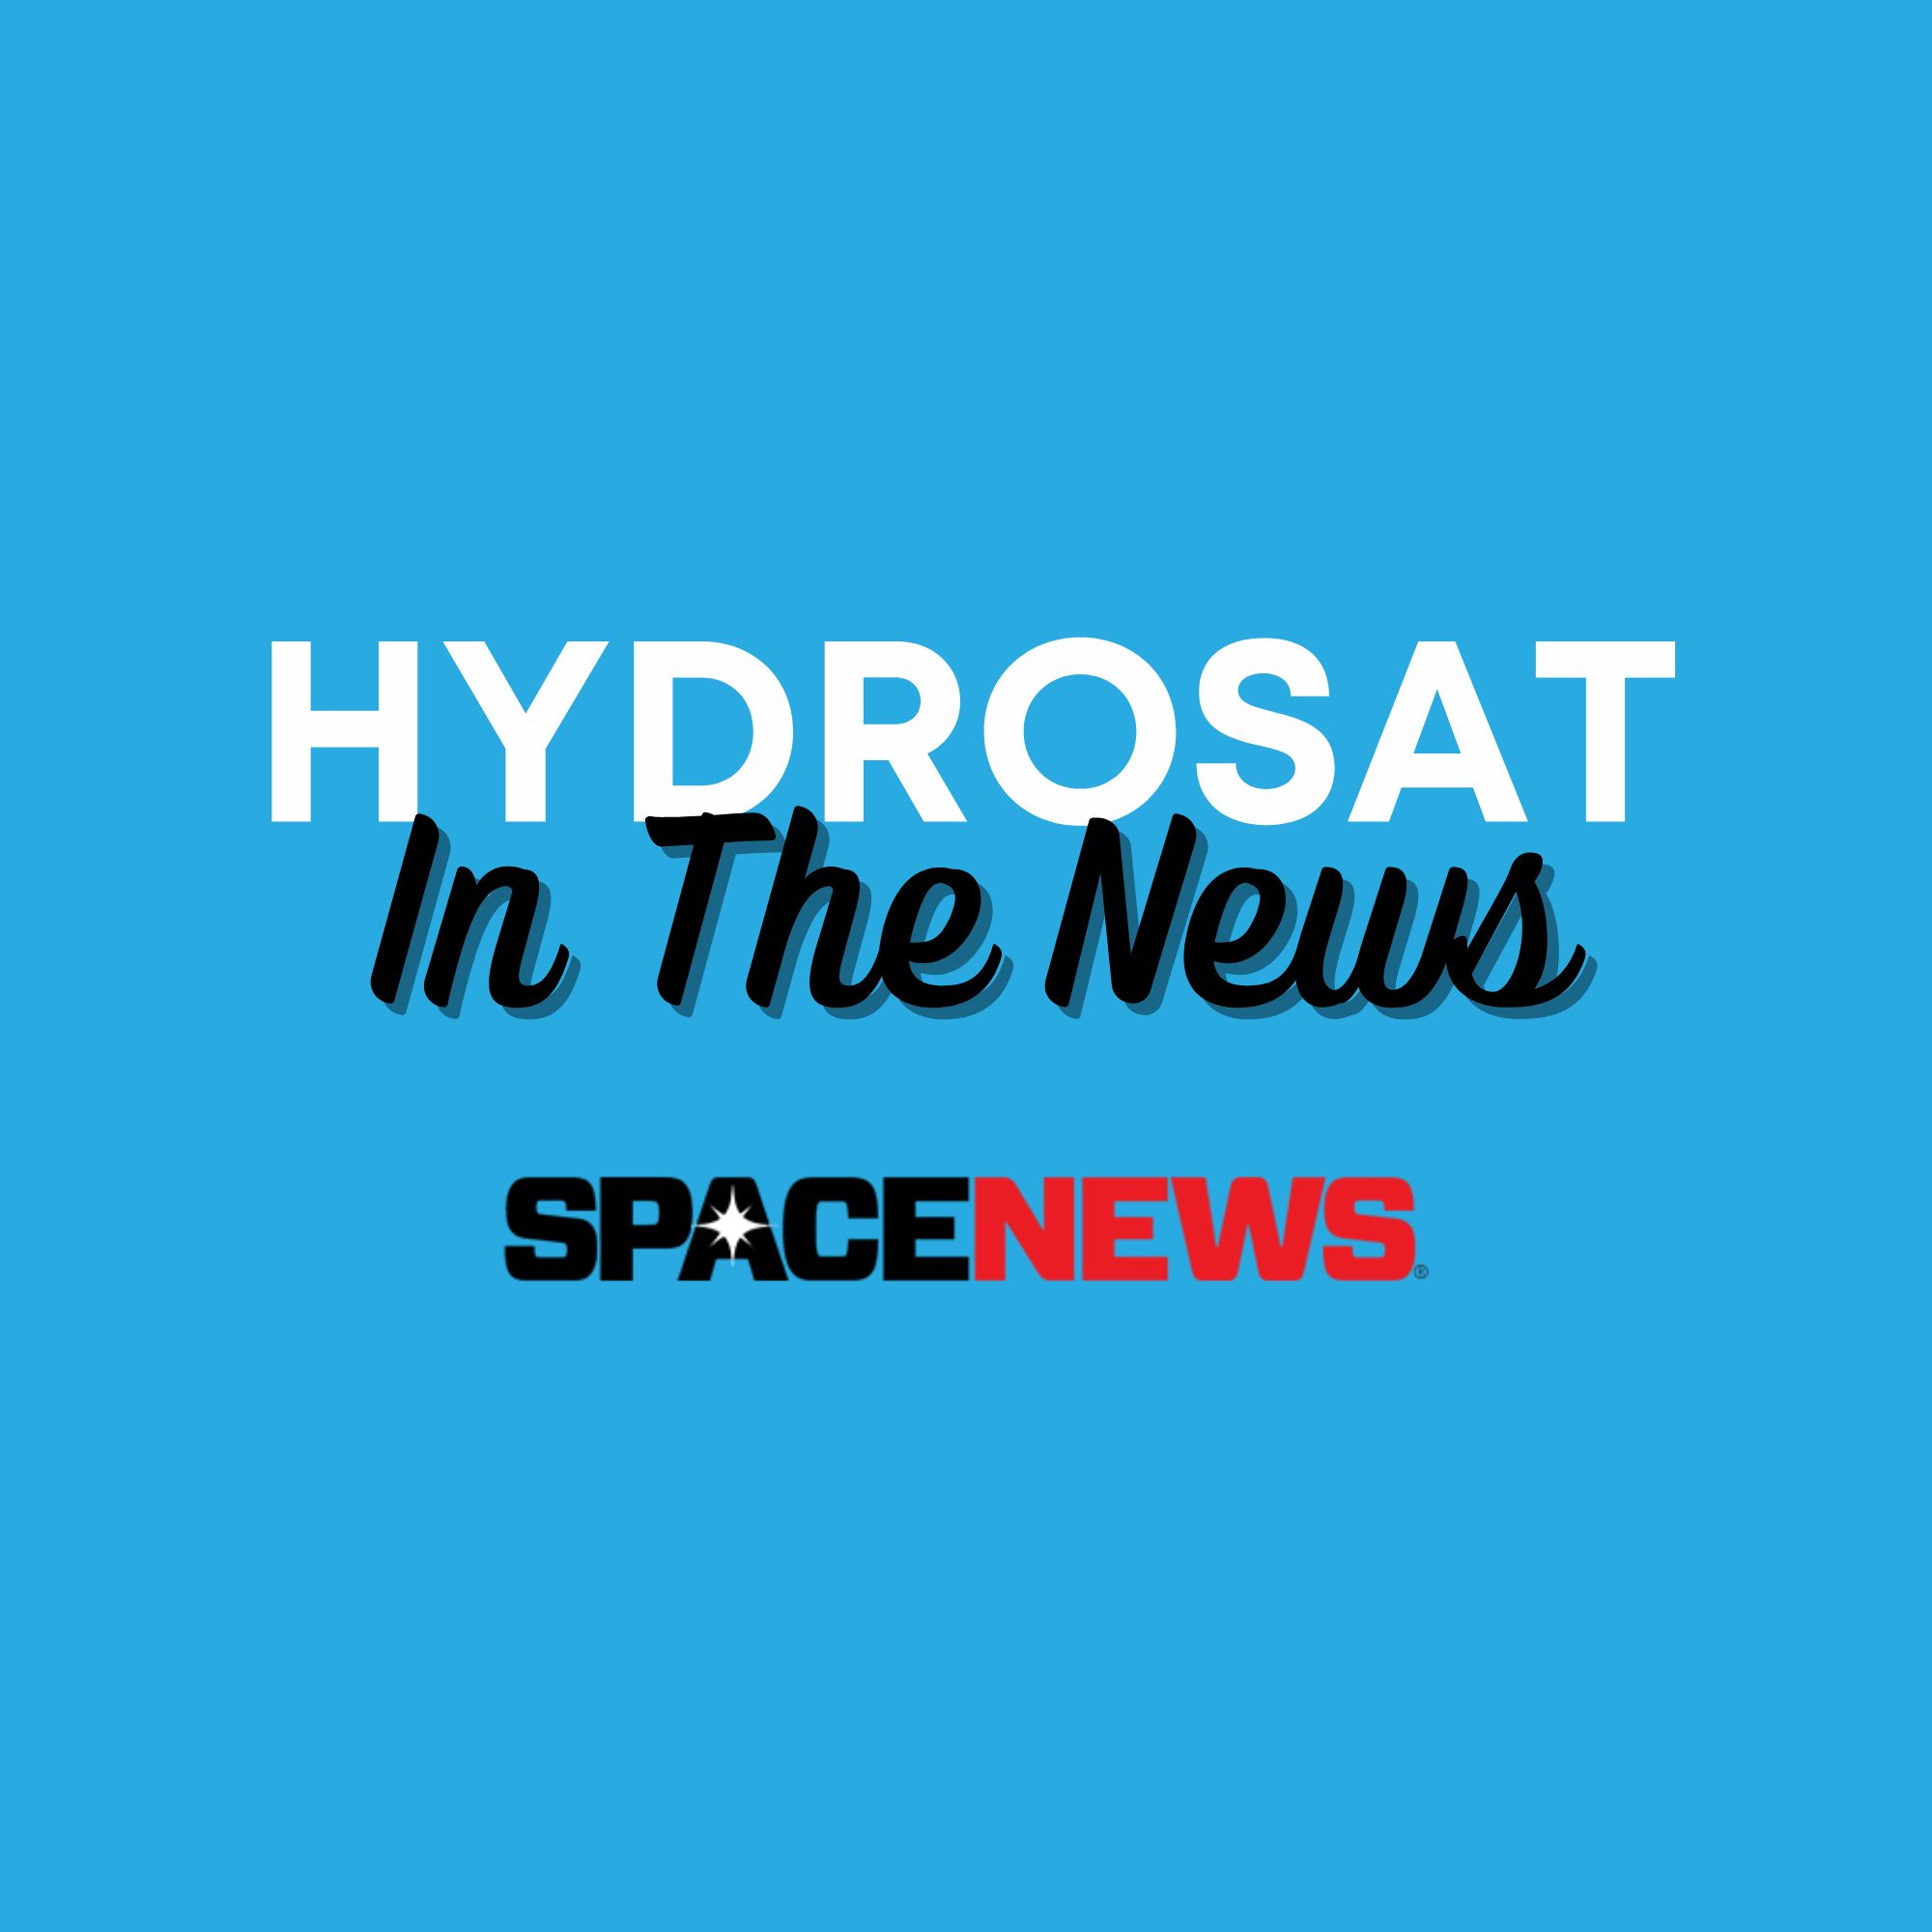 Hydrosat in the news space news